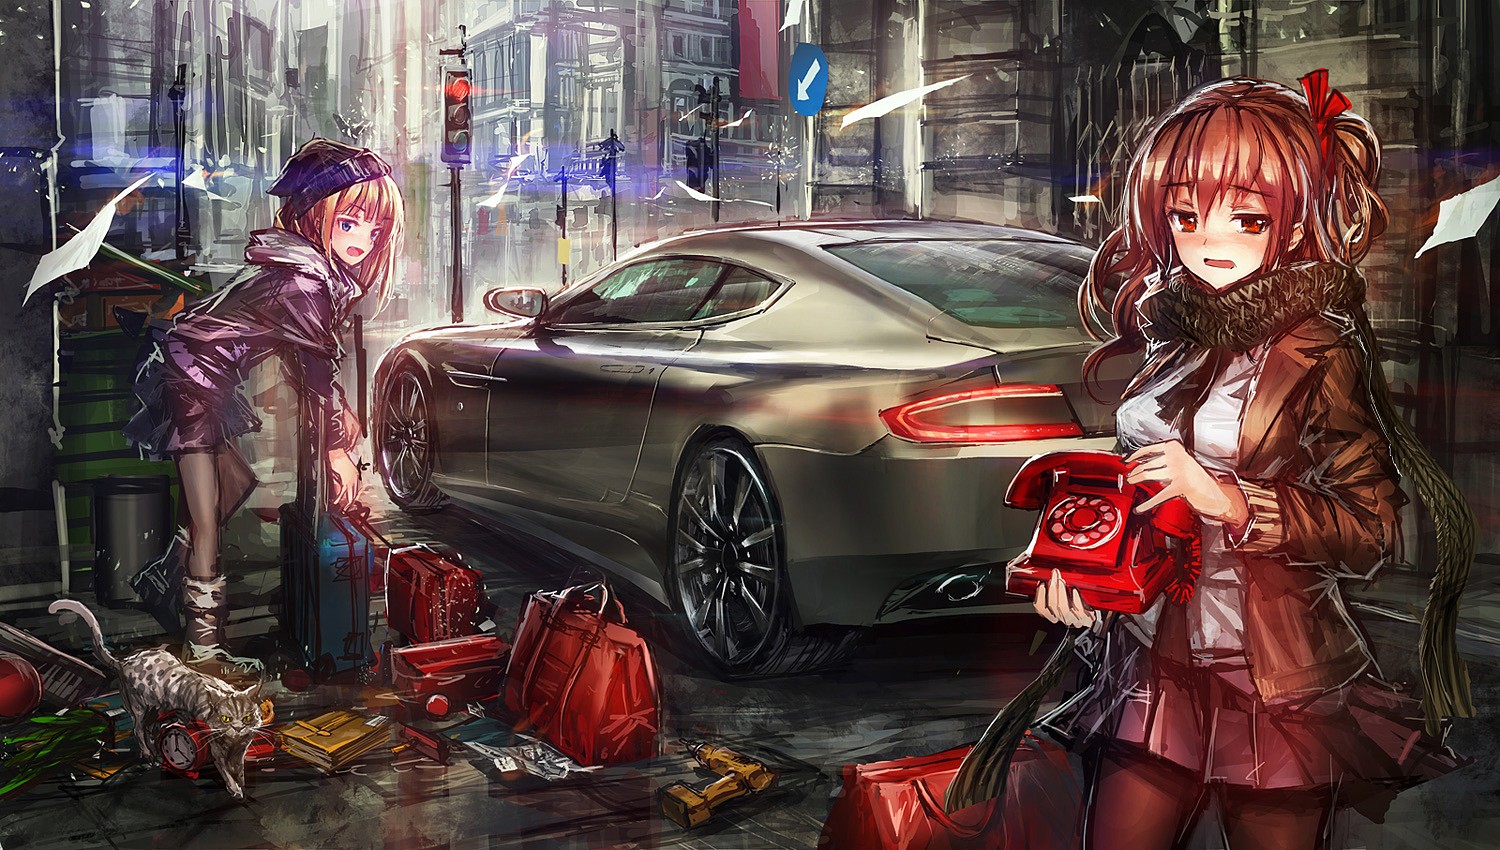 Anime 1500x850 anime girls original characters car _LM7_ vehicle women with cars phone red eyes city urban women outdoors cats anime two women